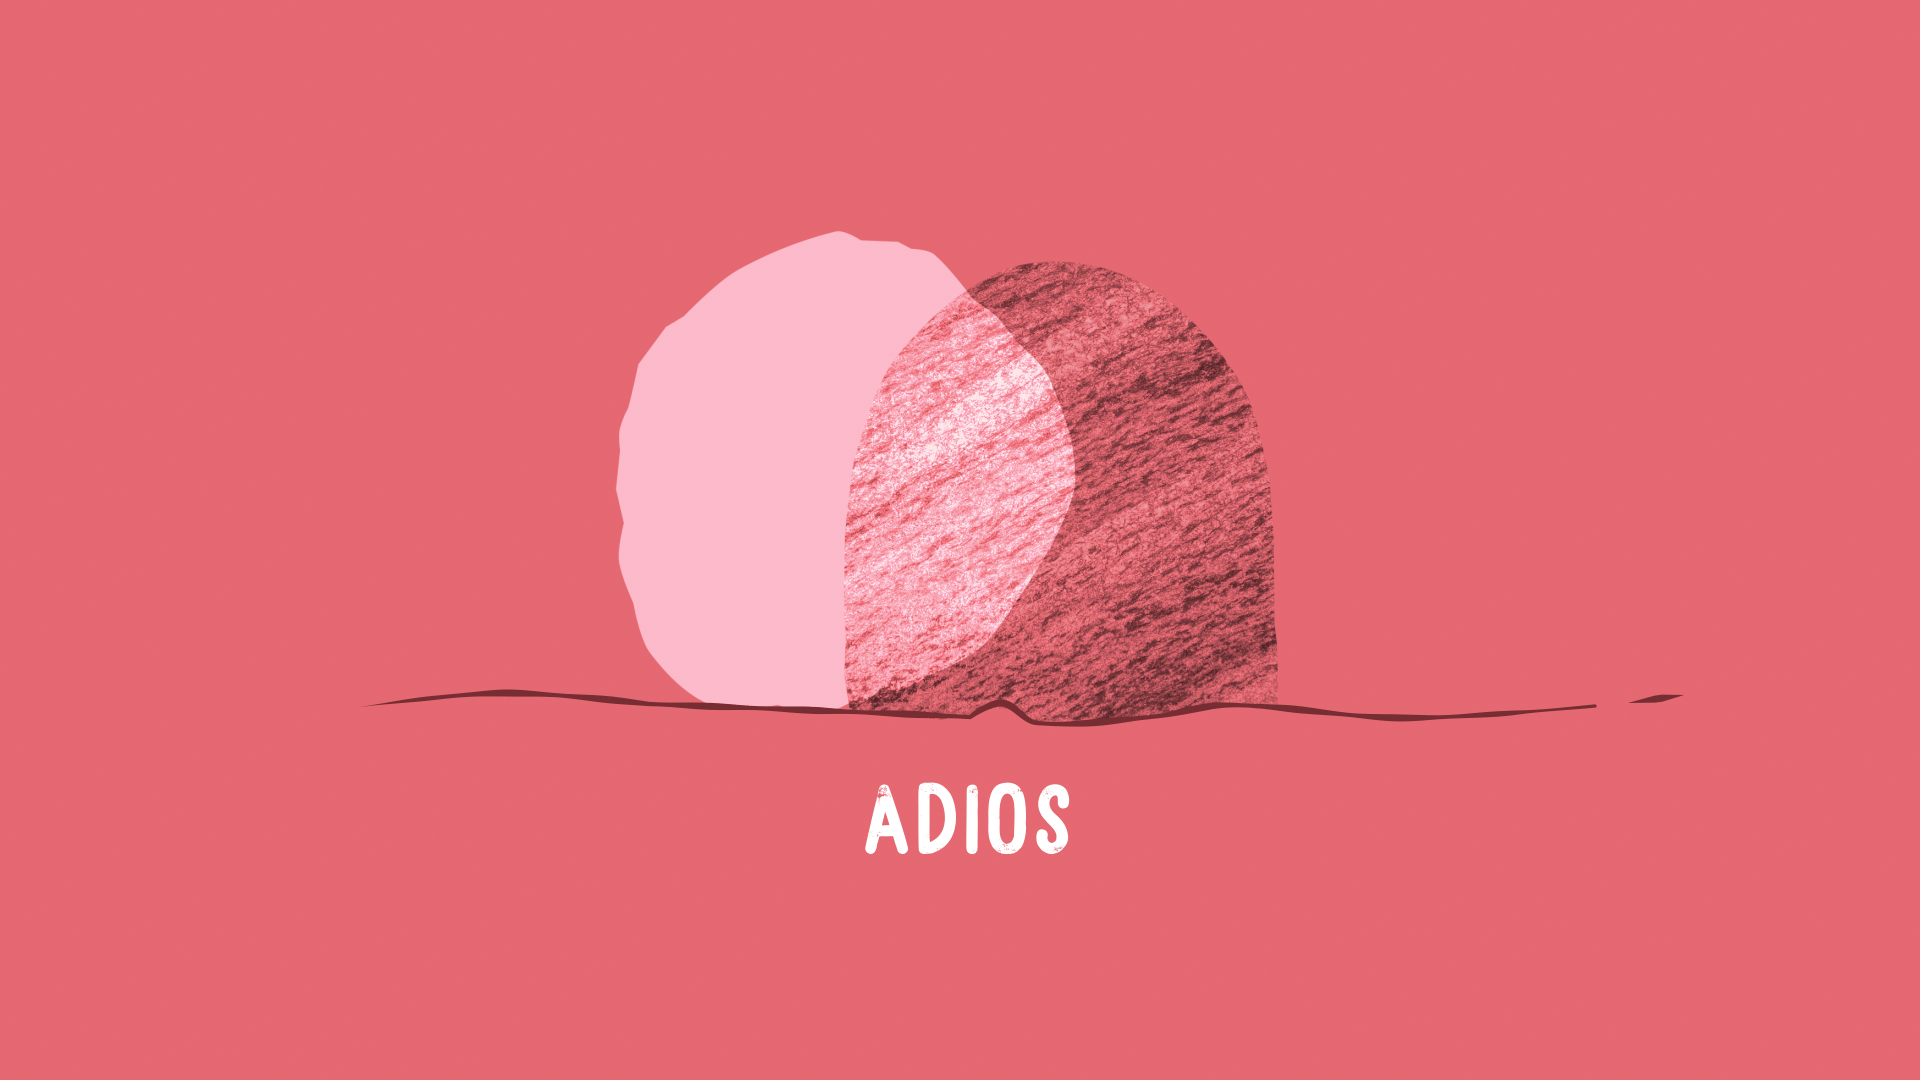 Illustration of two rocks on a pink background with the word 